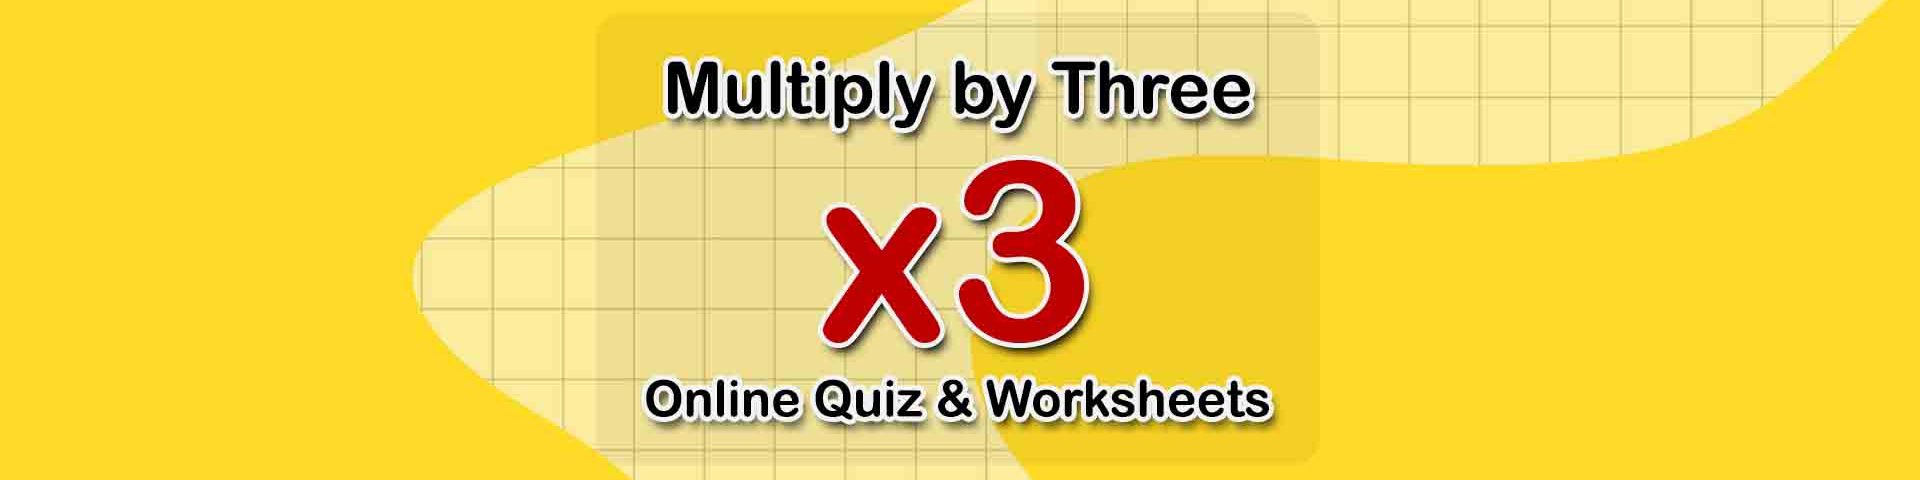 Multiply by Three (Online Quiz & Worksheets for Math)